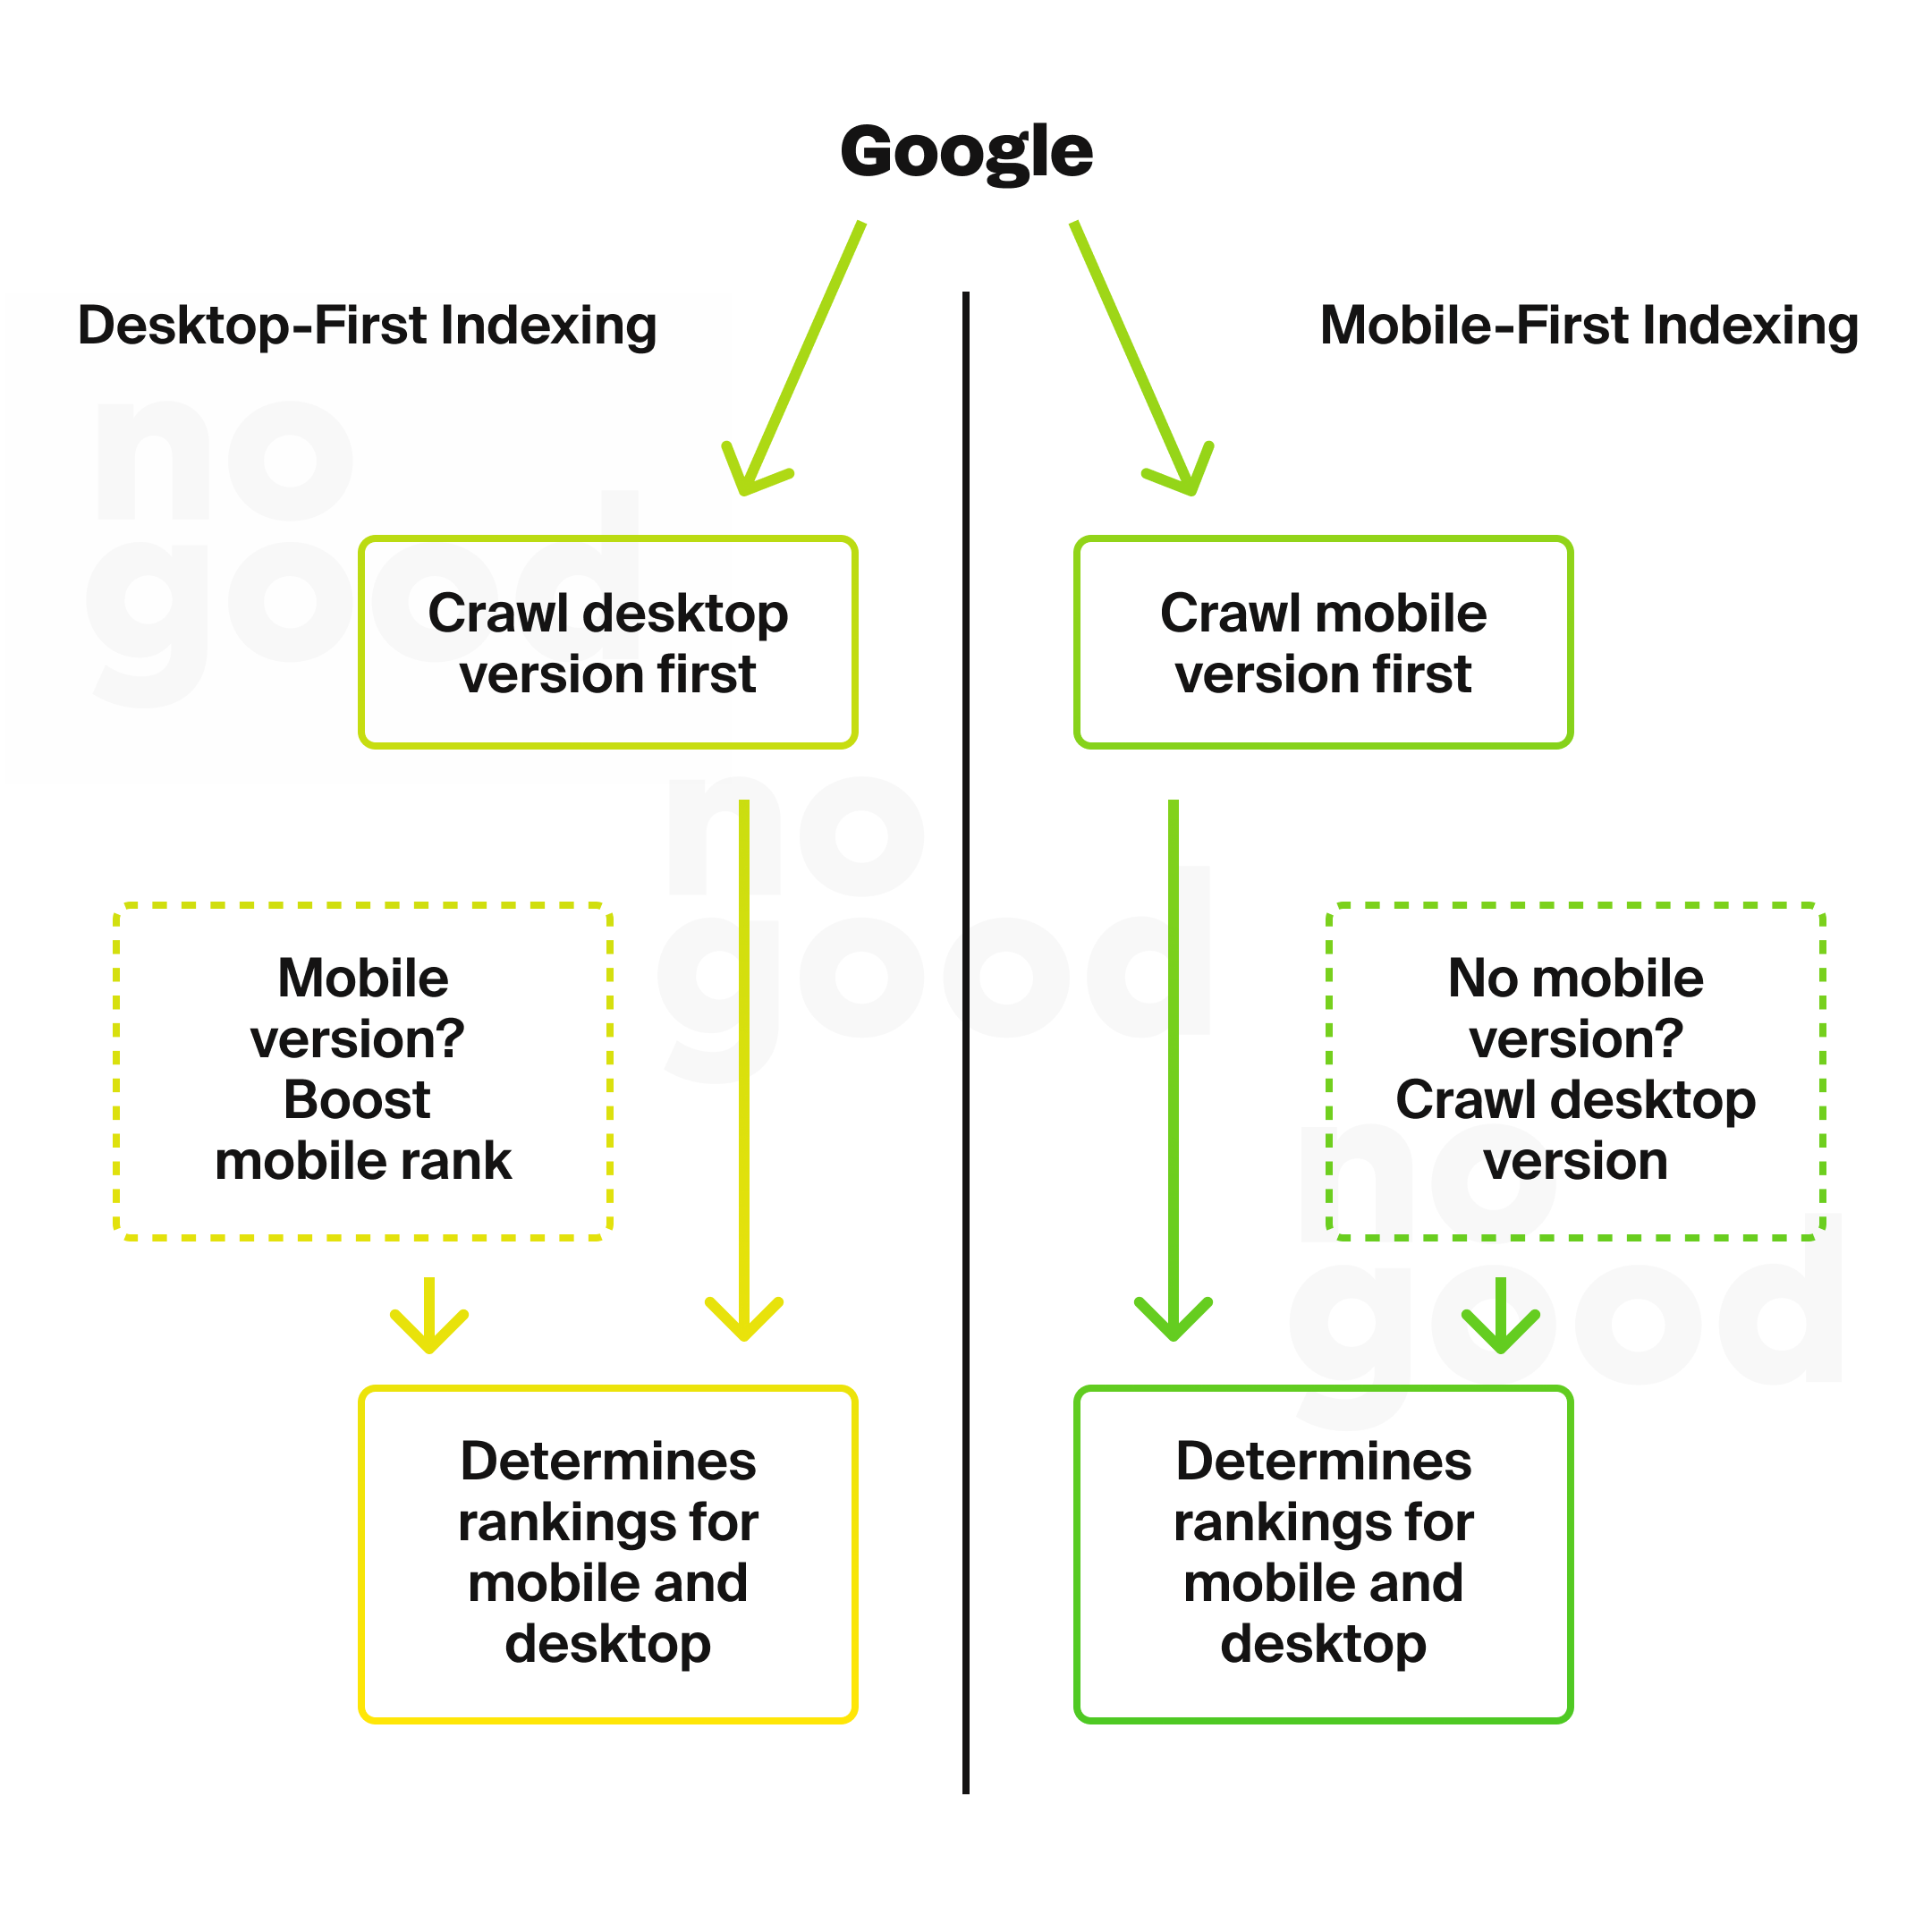 Google: Desktop-first indexing vs. mobile-first indexing